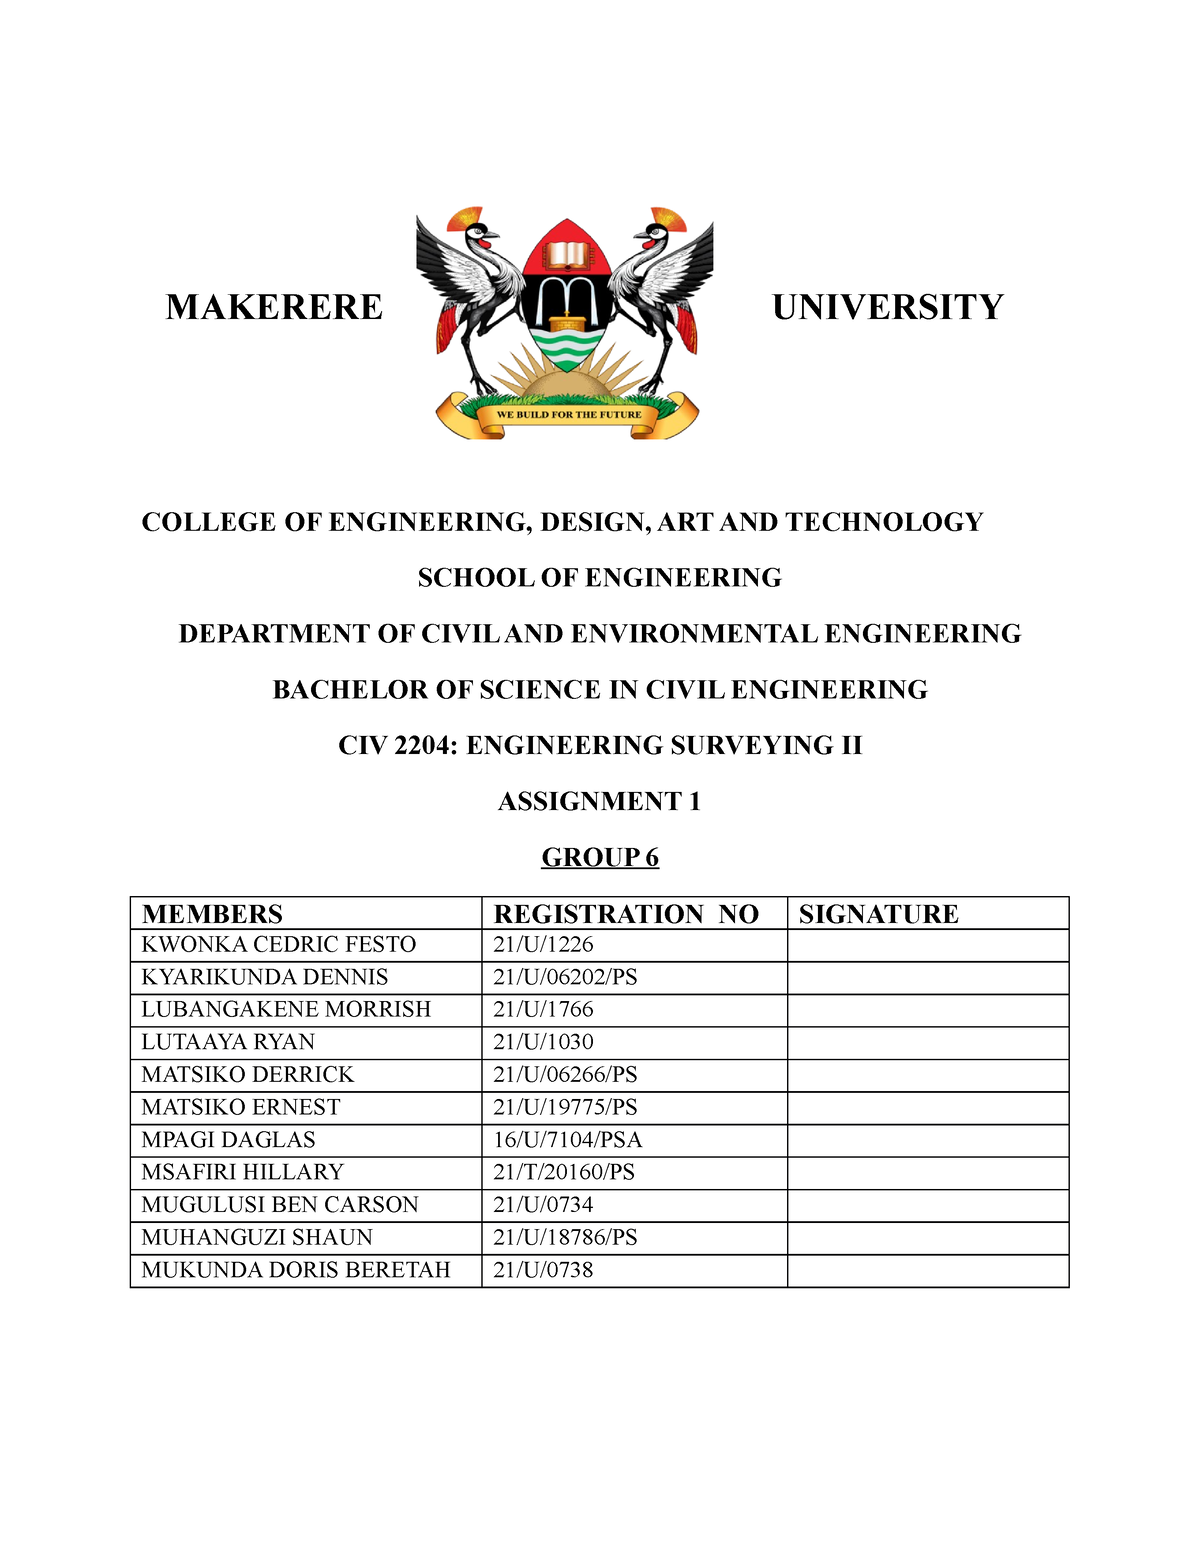 research reports from makerere university